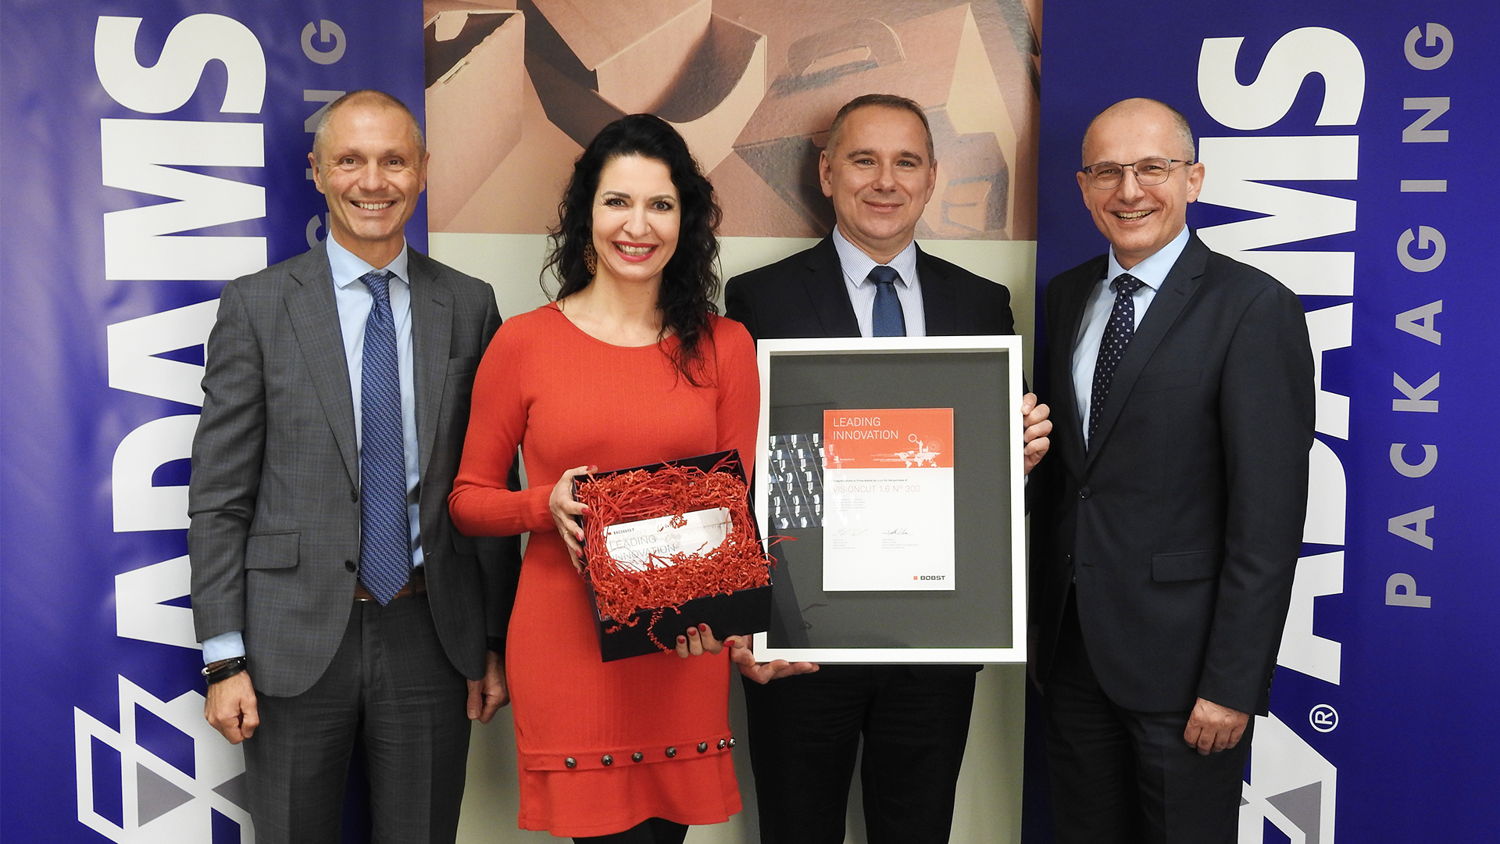 Anello Meloro (Product Sales Director BOBST), Anna Skrzyniarz (VP at ADAMS), Adam Skrzyniarz (Founder and President of the management board at ADAMS), Libor Panus (Business Director Central Eastern Europe BOBST)